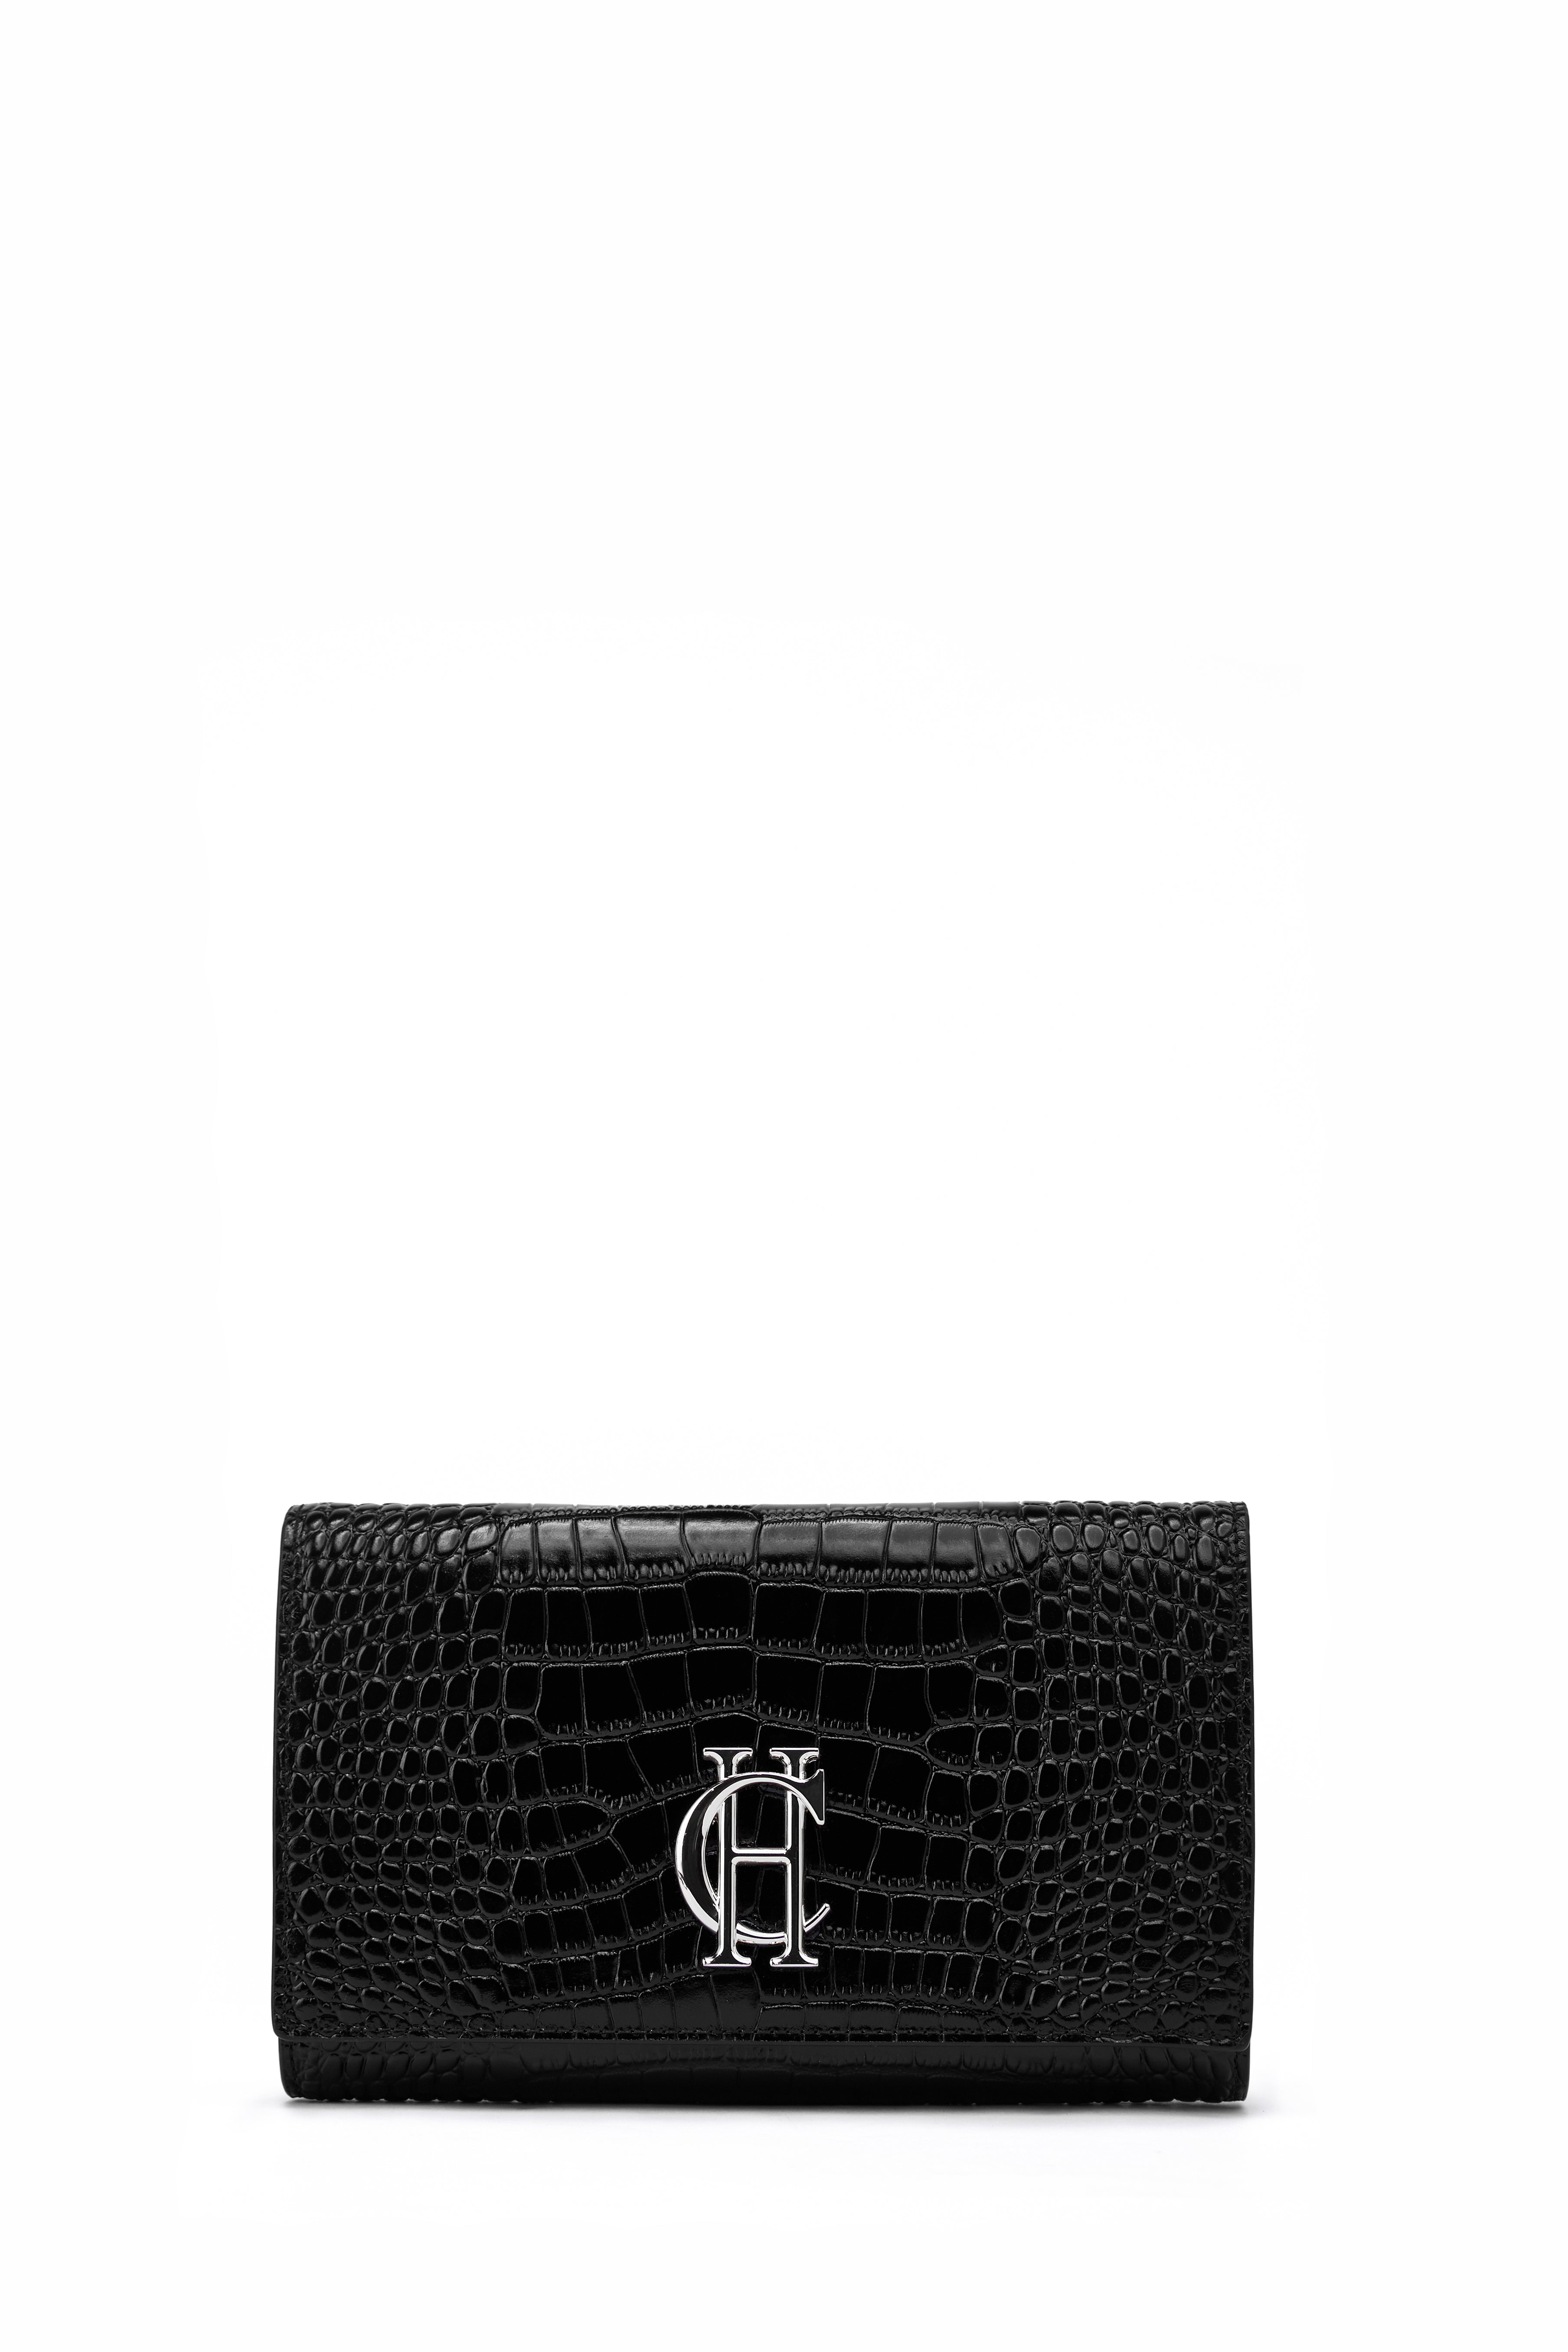 Chanel Handbags for Sale at Auction - Page 33